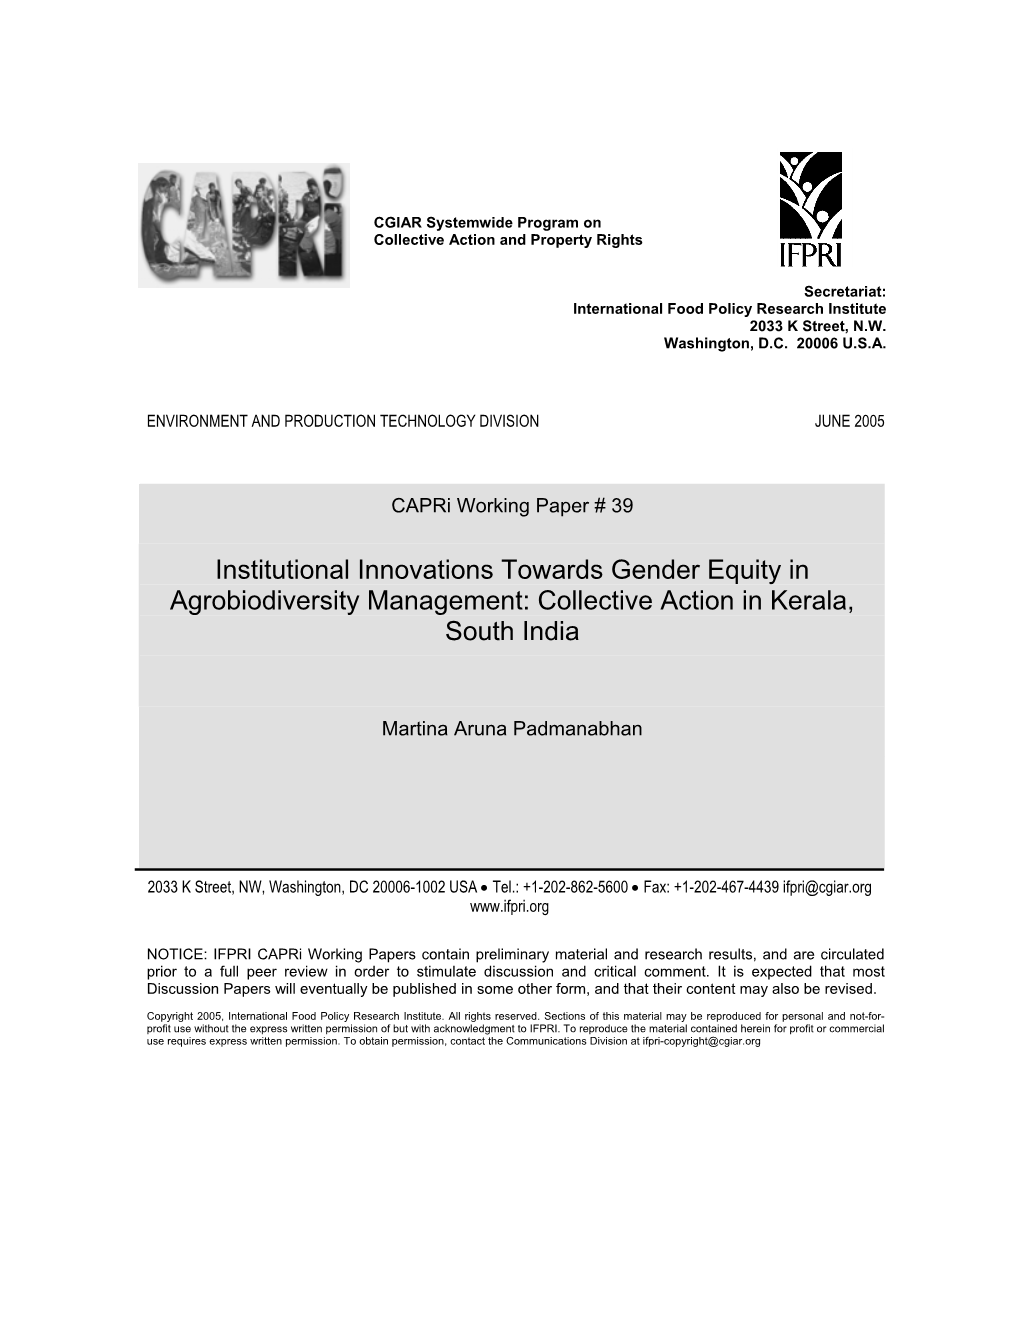 Institutional Innovations Towards Gender Equity in Agrobiodiversity Management: Collective Action in Kerala, South India